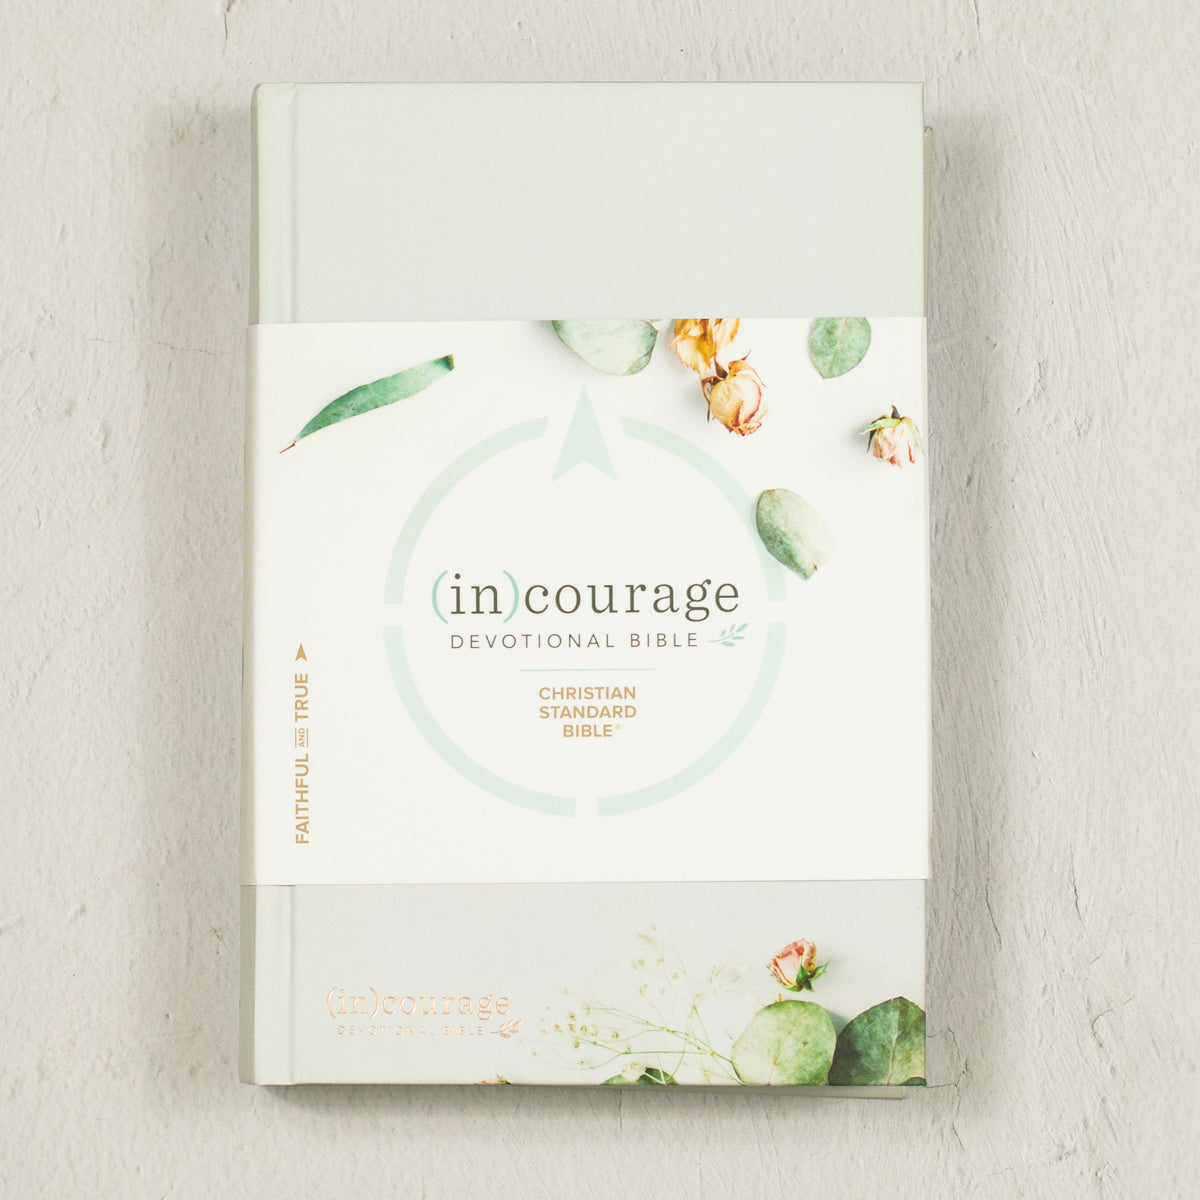 CSB (in)courage Devotional Bible